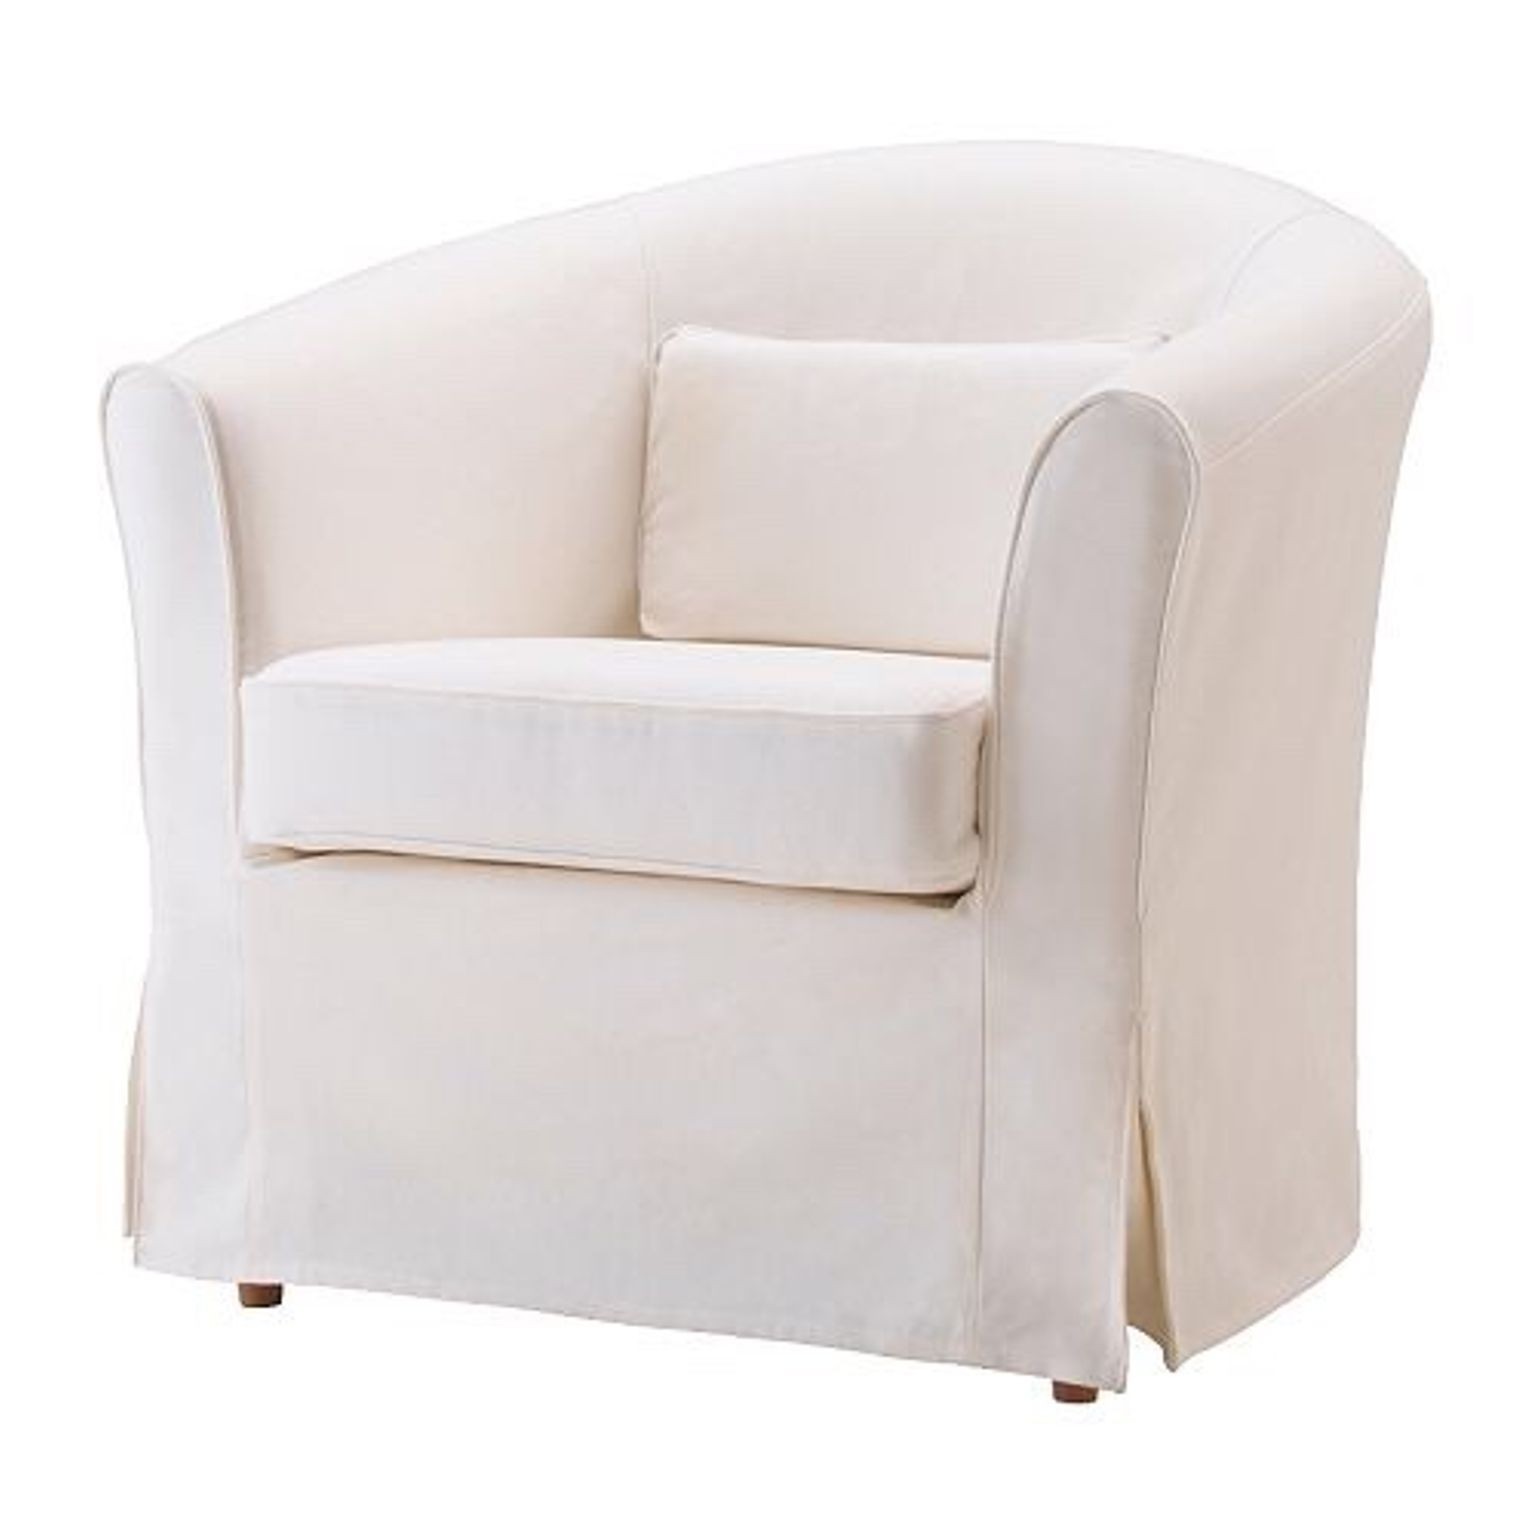 Overstuffed chair covers